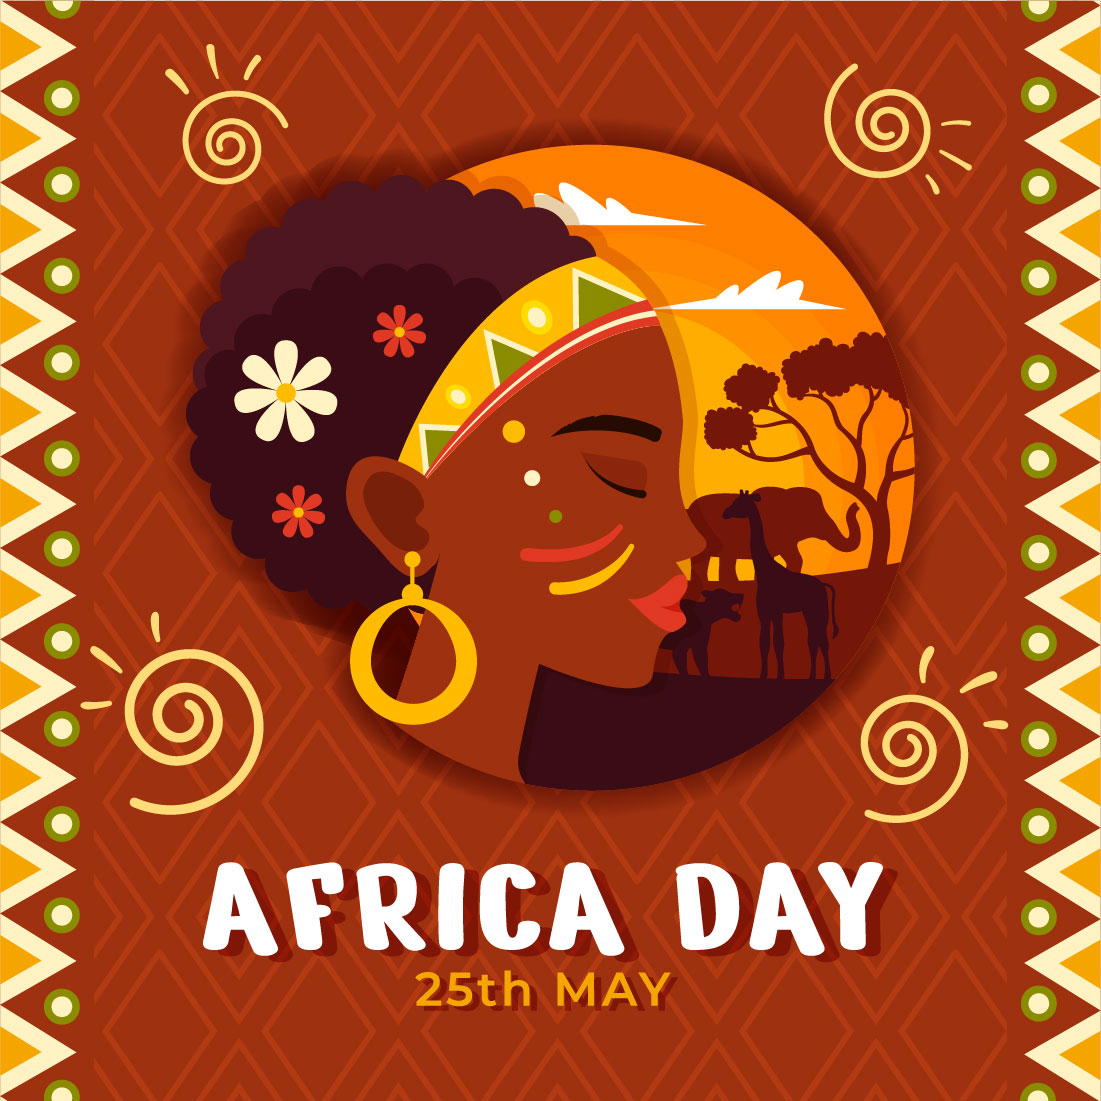 12 Happy Africa Day Illustration cover image.